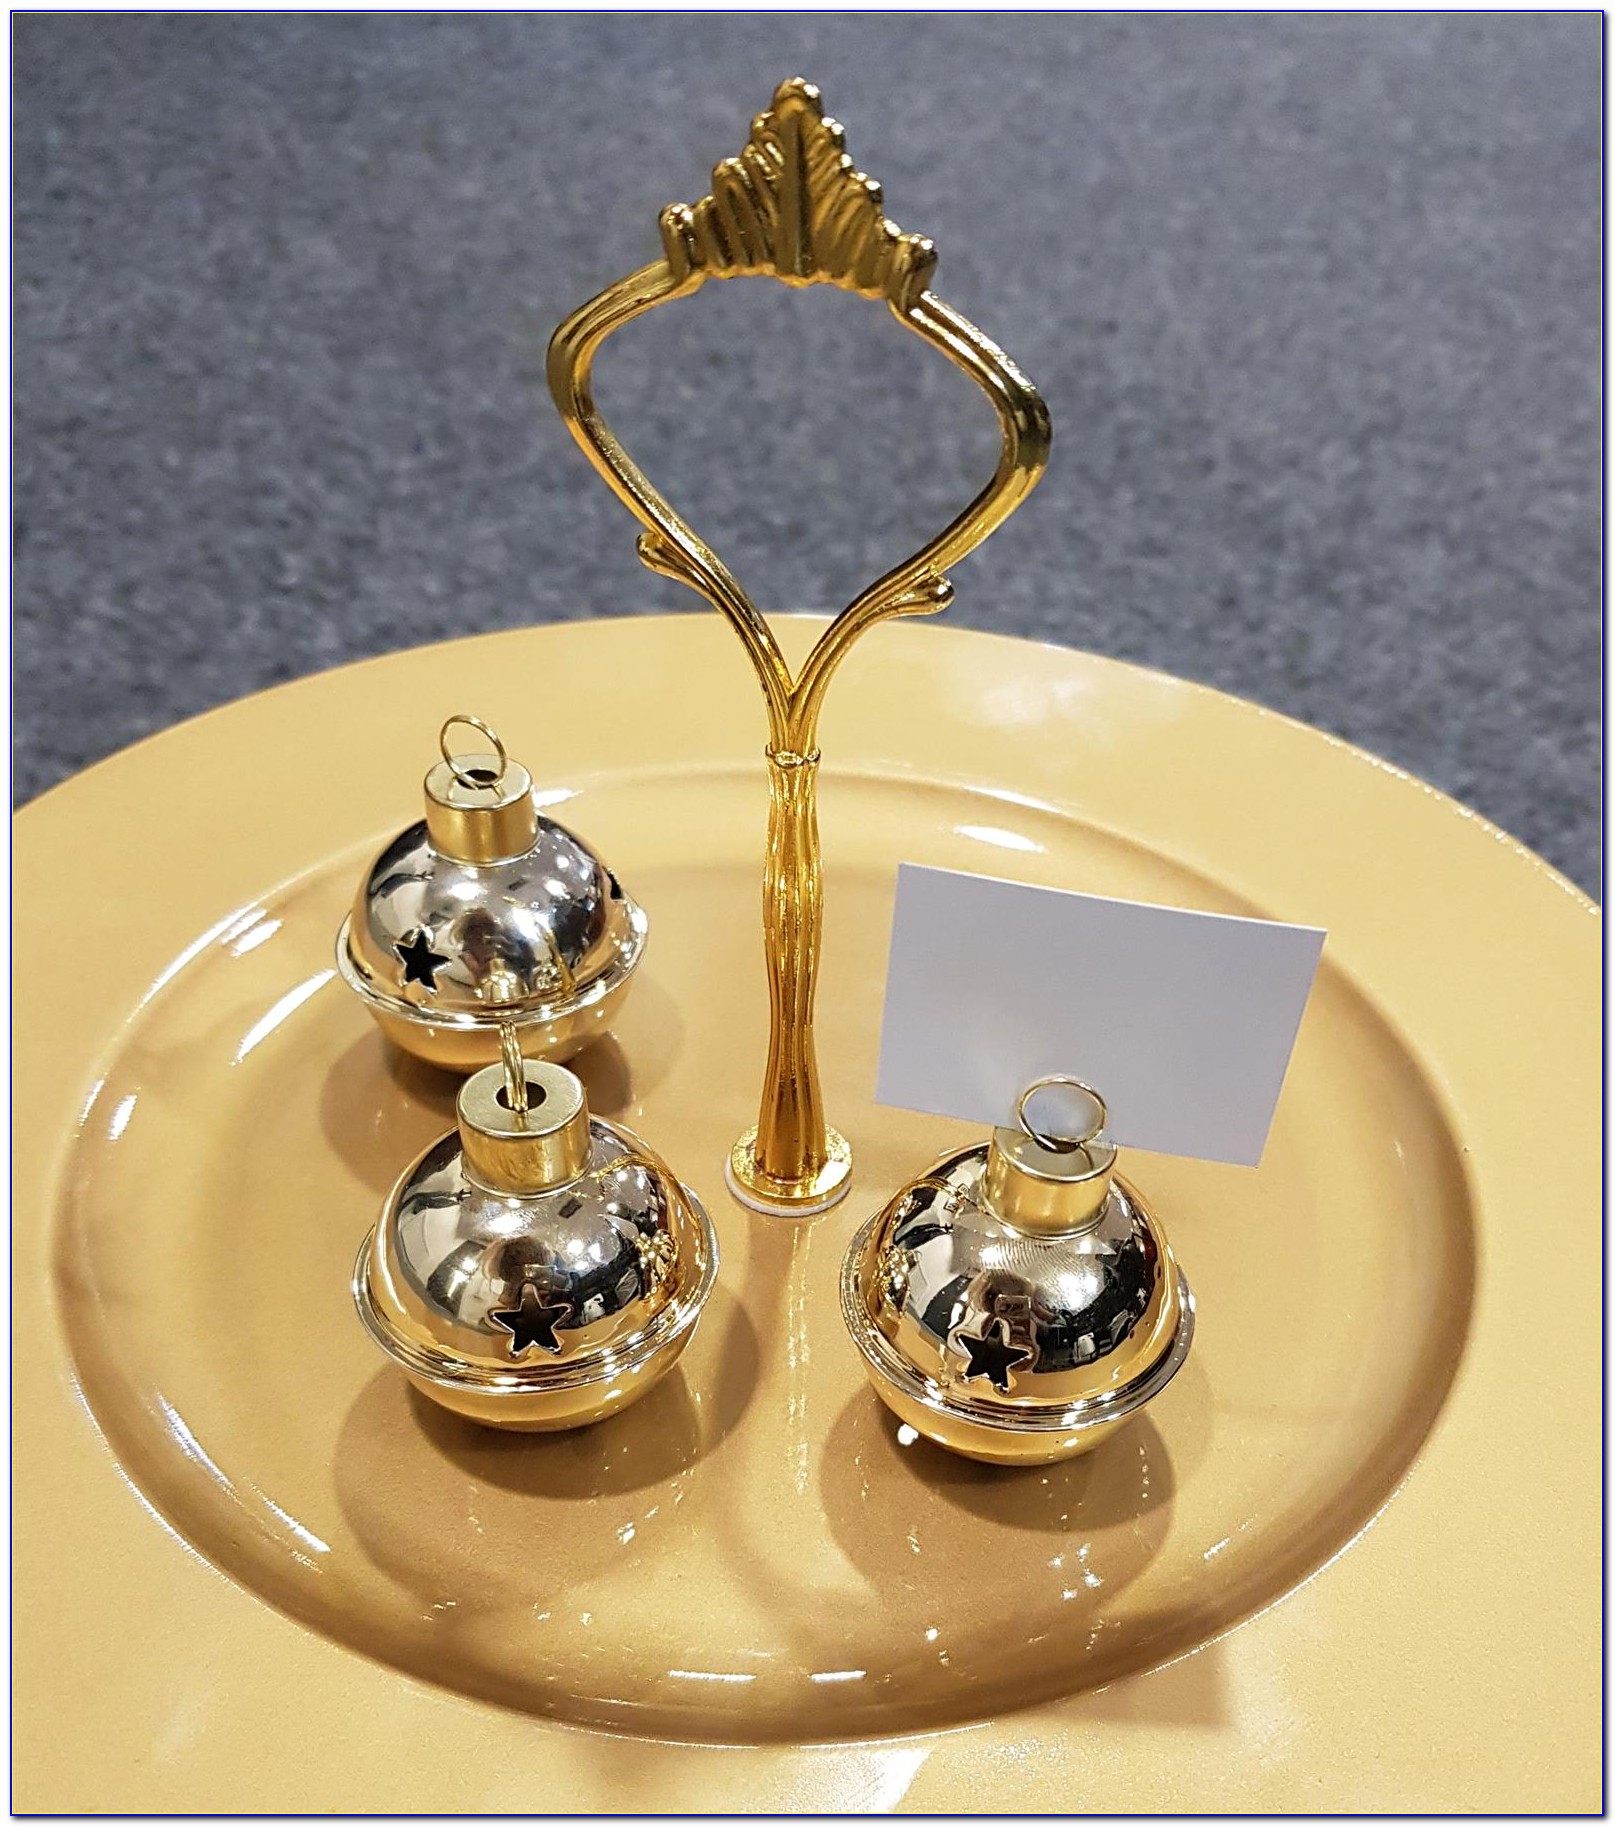 Gold Wedding Bell Place Card Holders